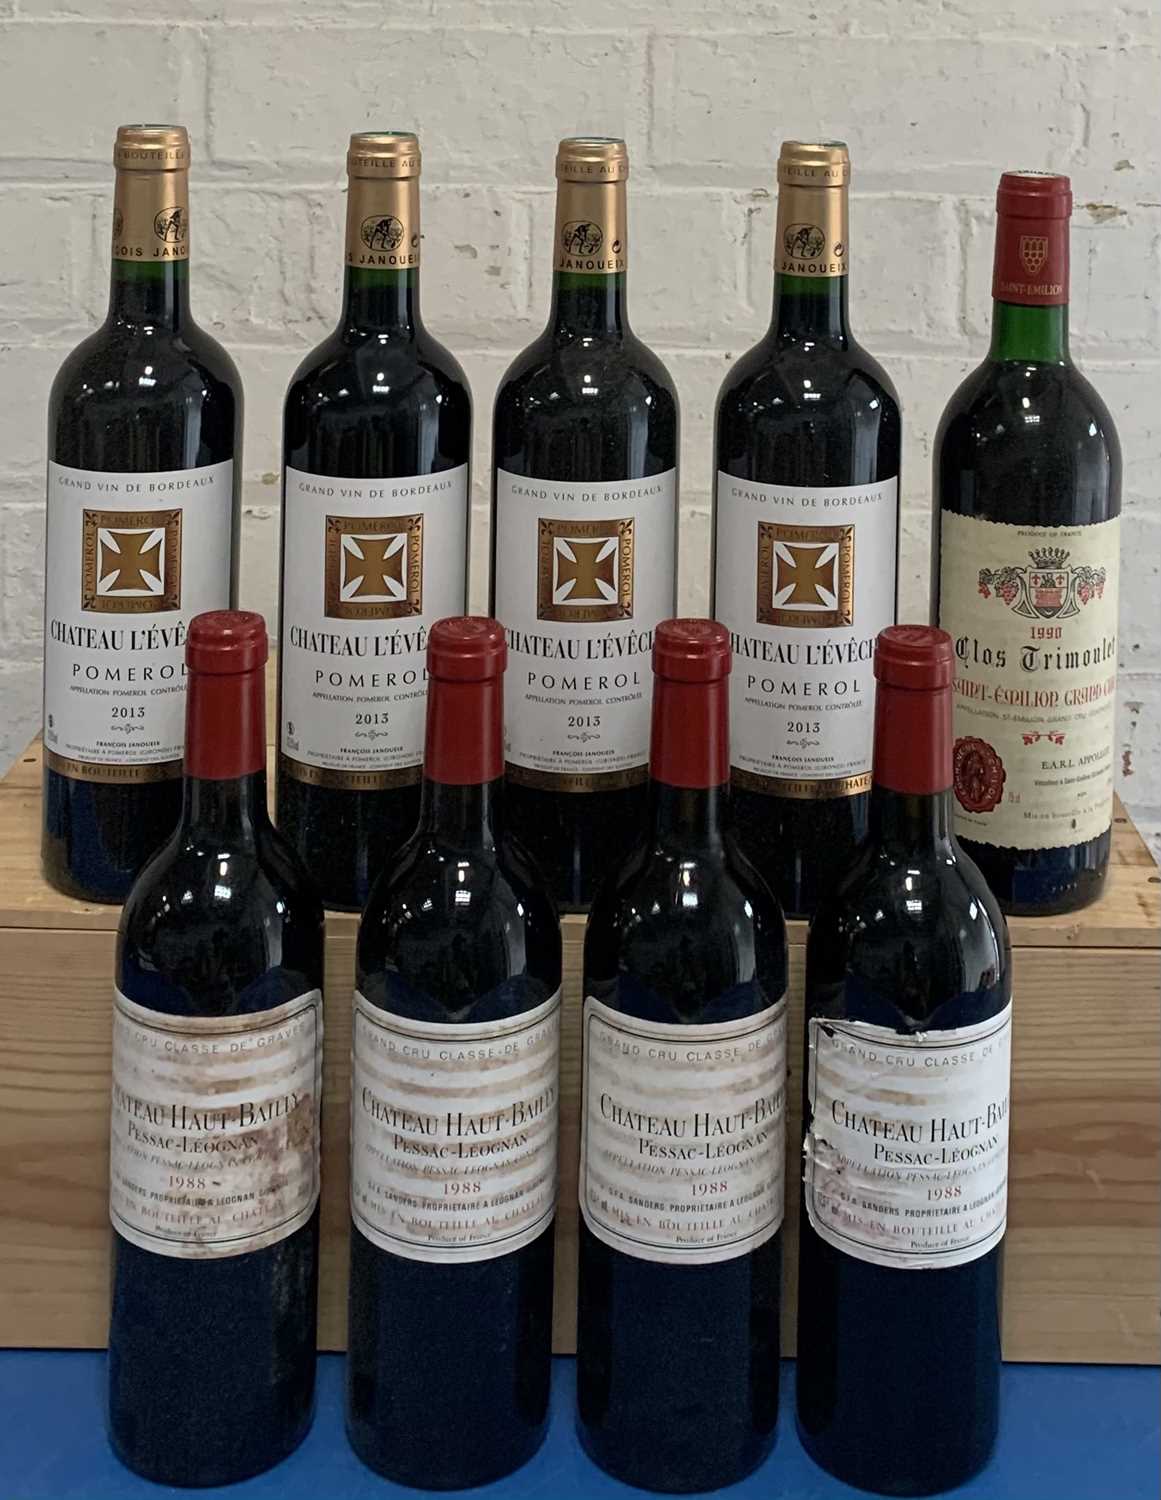 Lot 21 - 9 Bottles Mixed Lot Red Graves, Pomerol and St. Emilion